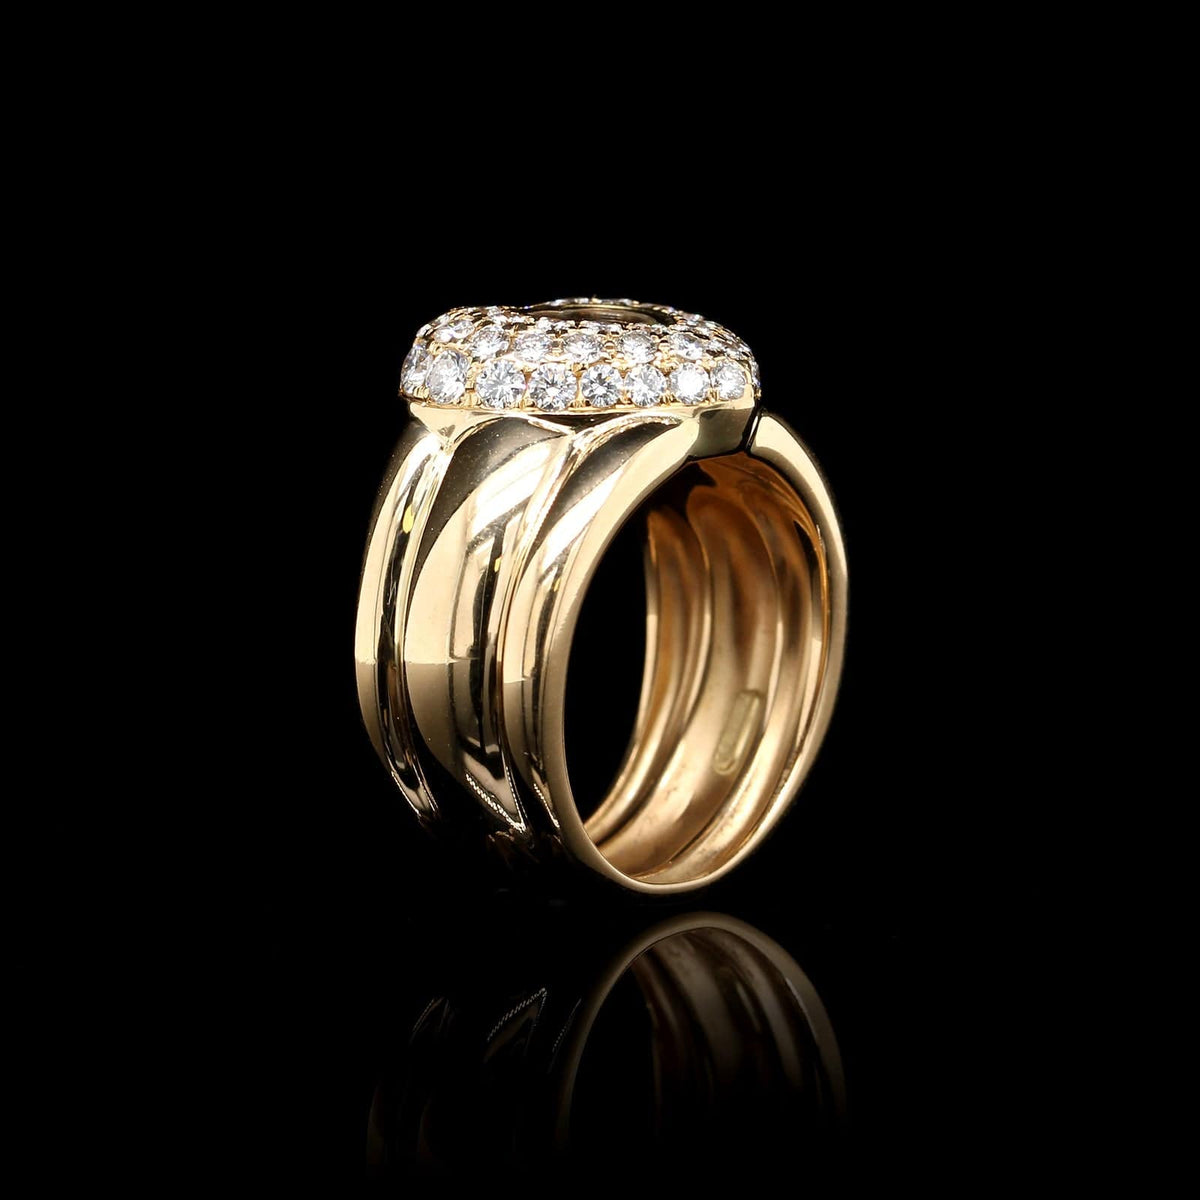 Estate Vintage Diamond Blossom Ring in 14k White and Yellow Gold